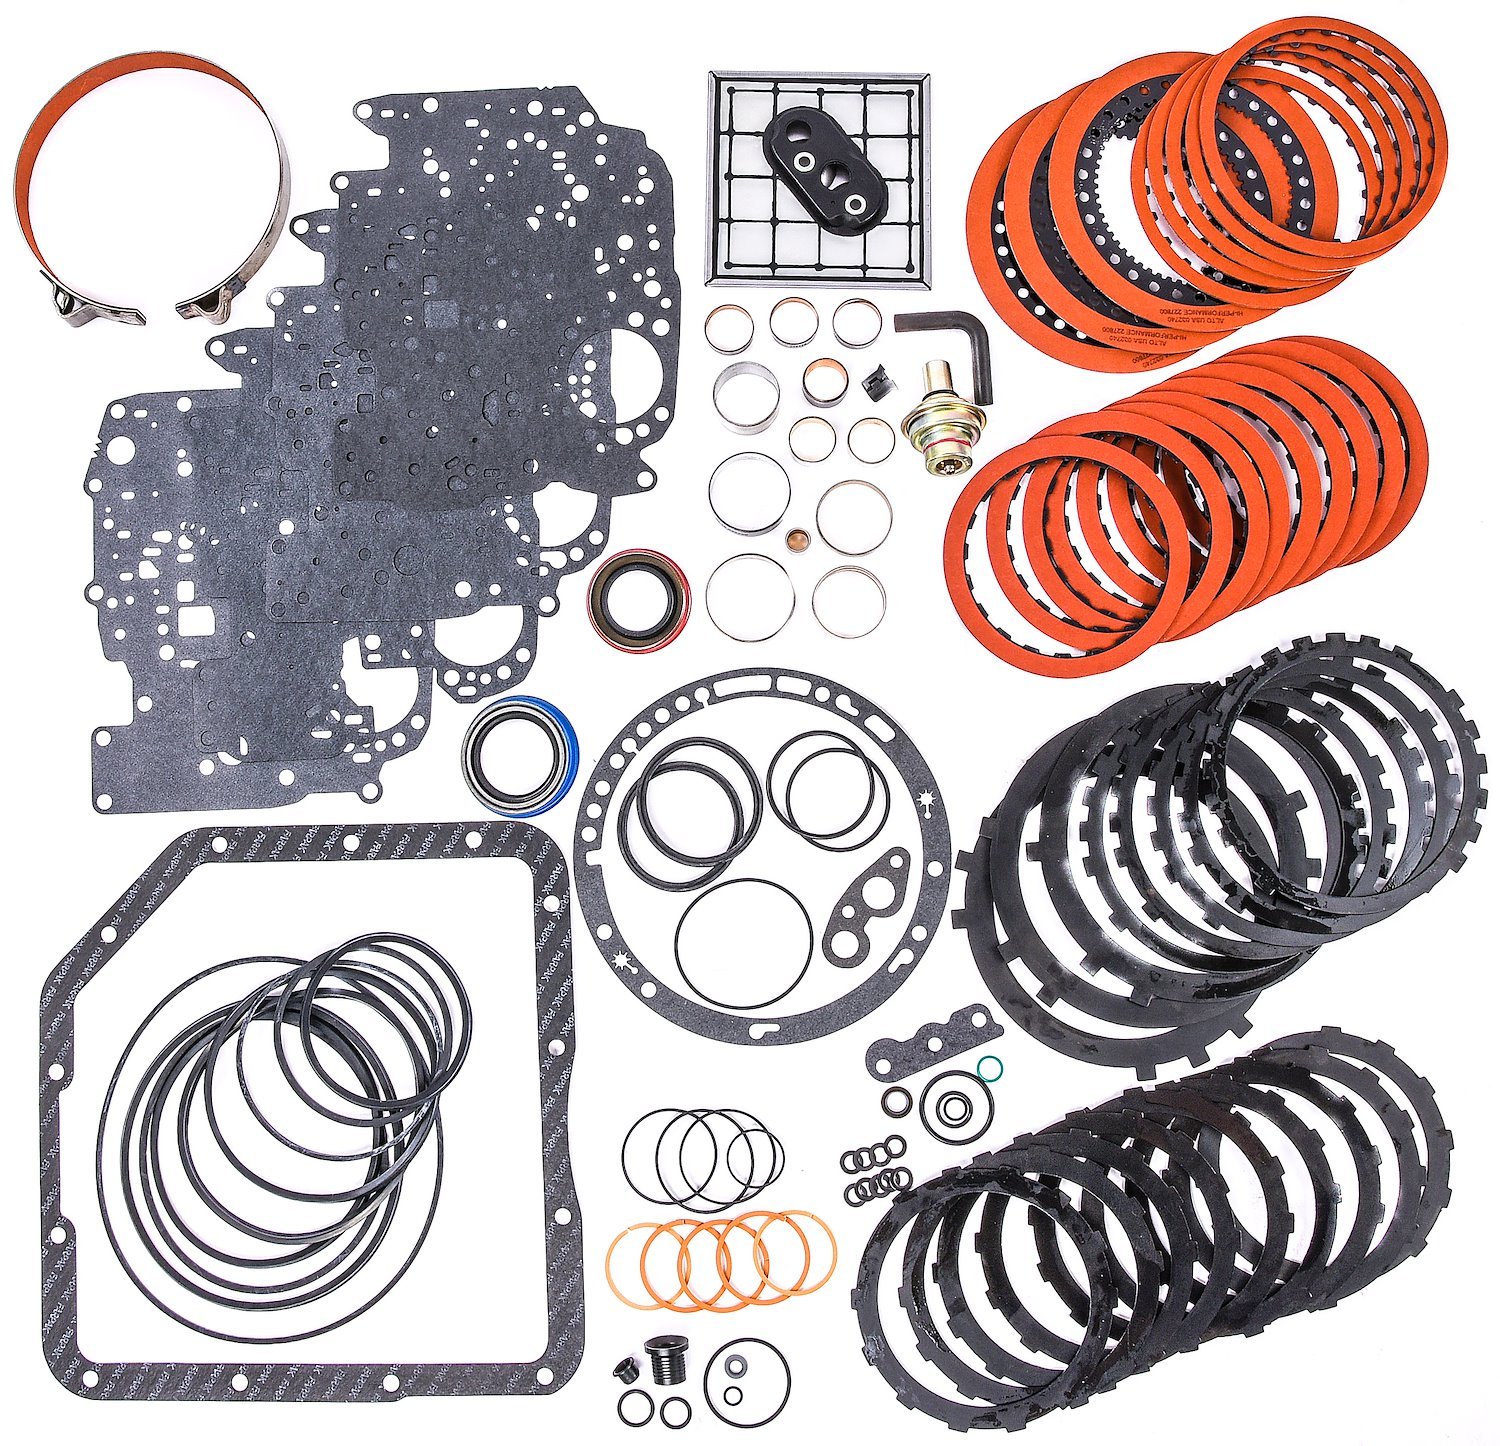 Automatic Transmission High-Performance Rebuild Kit for 1969-1981 GM TH350 [Complete Kit]